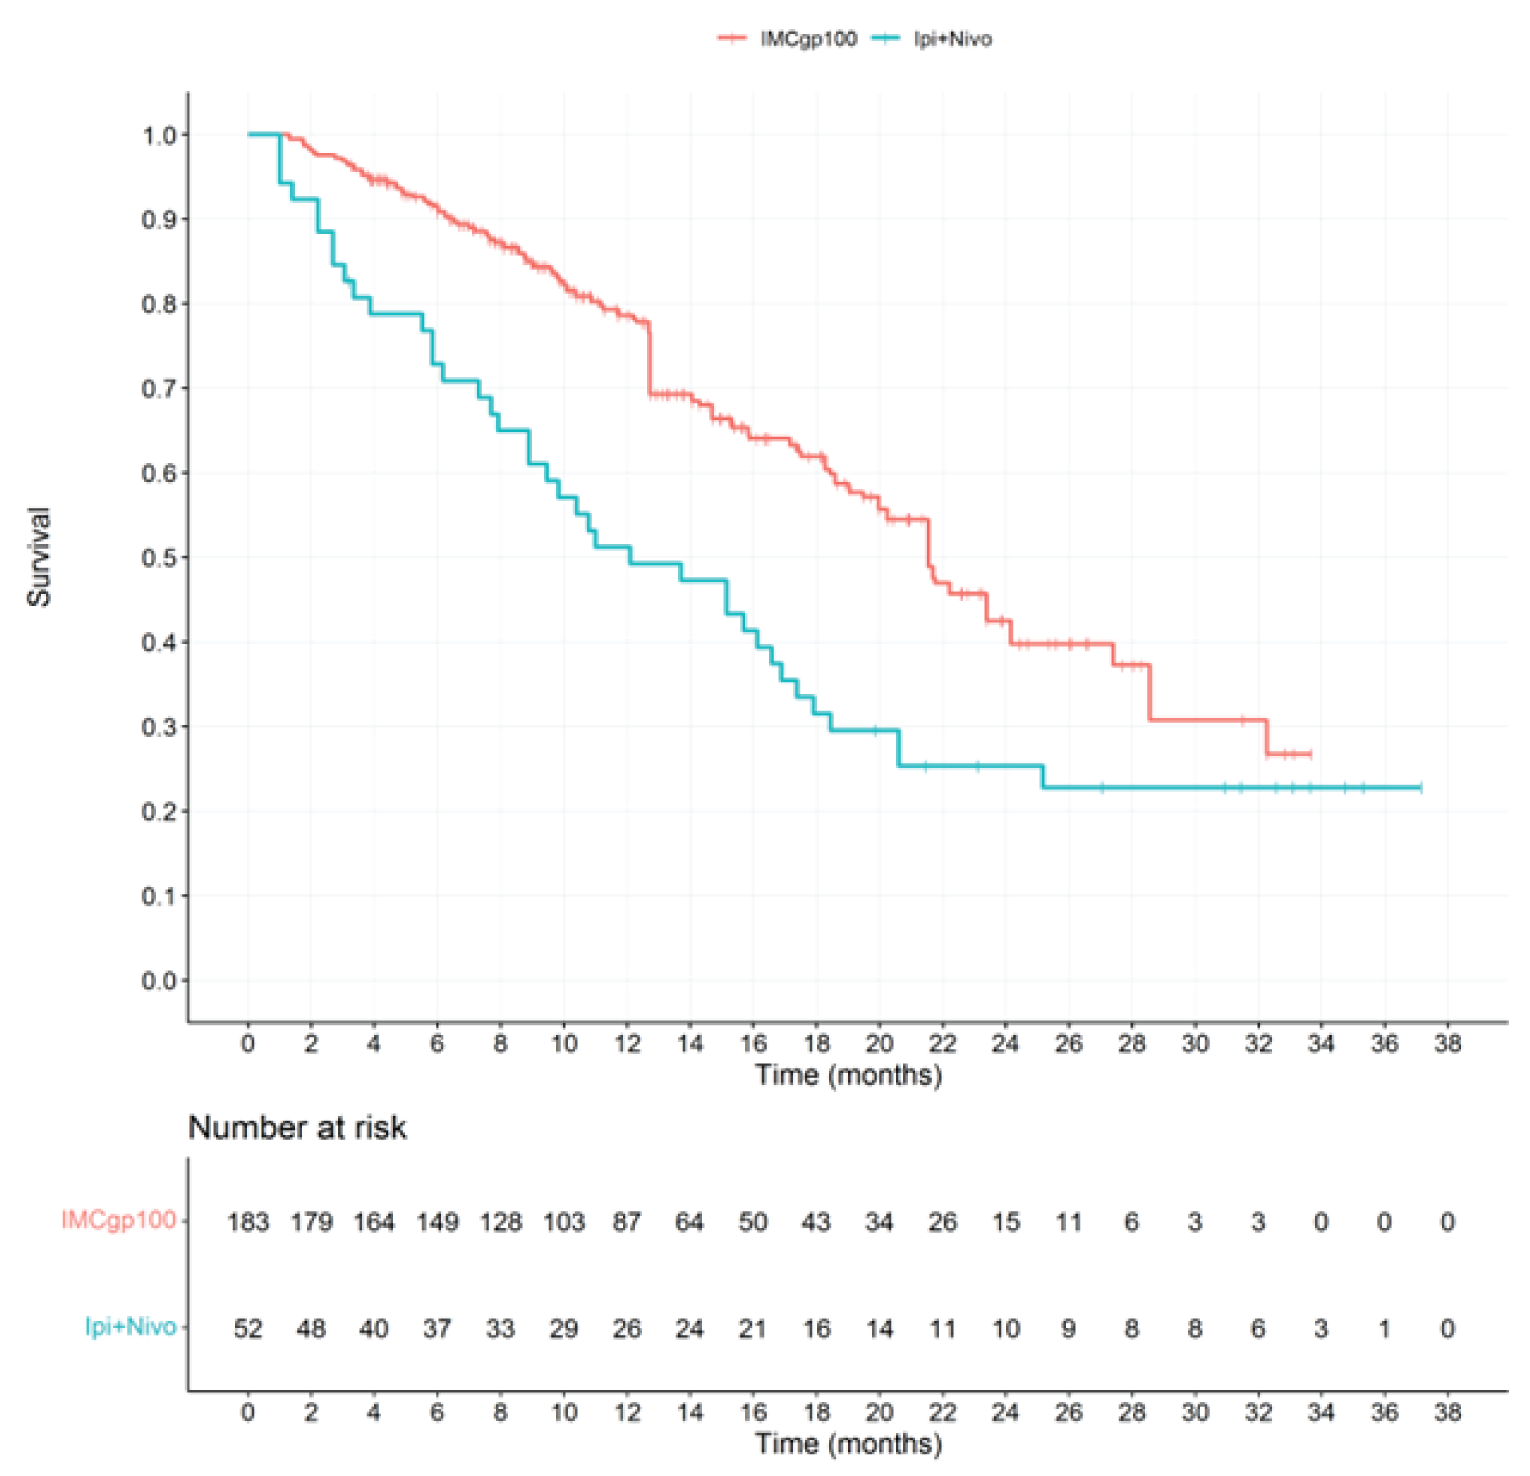 KM plot of OS for tebentafusp (index trial) and ipilimumab + nivolumab (comparator trial) from 0 to 38 months of follow-up. The curves diverge starting at month 0, with tebentafusp above ipilimumab + nivolumab, and remained separated until approximately 32 months, when they converge and plateau.